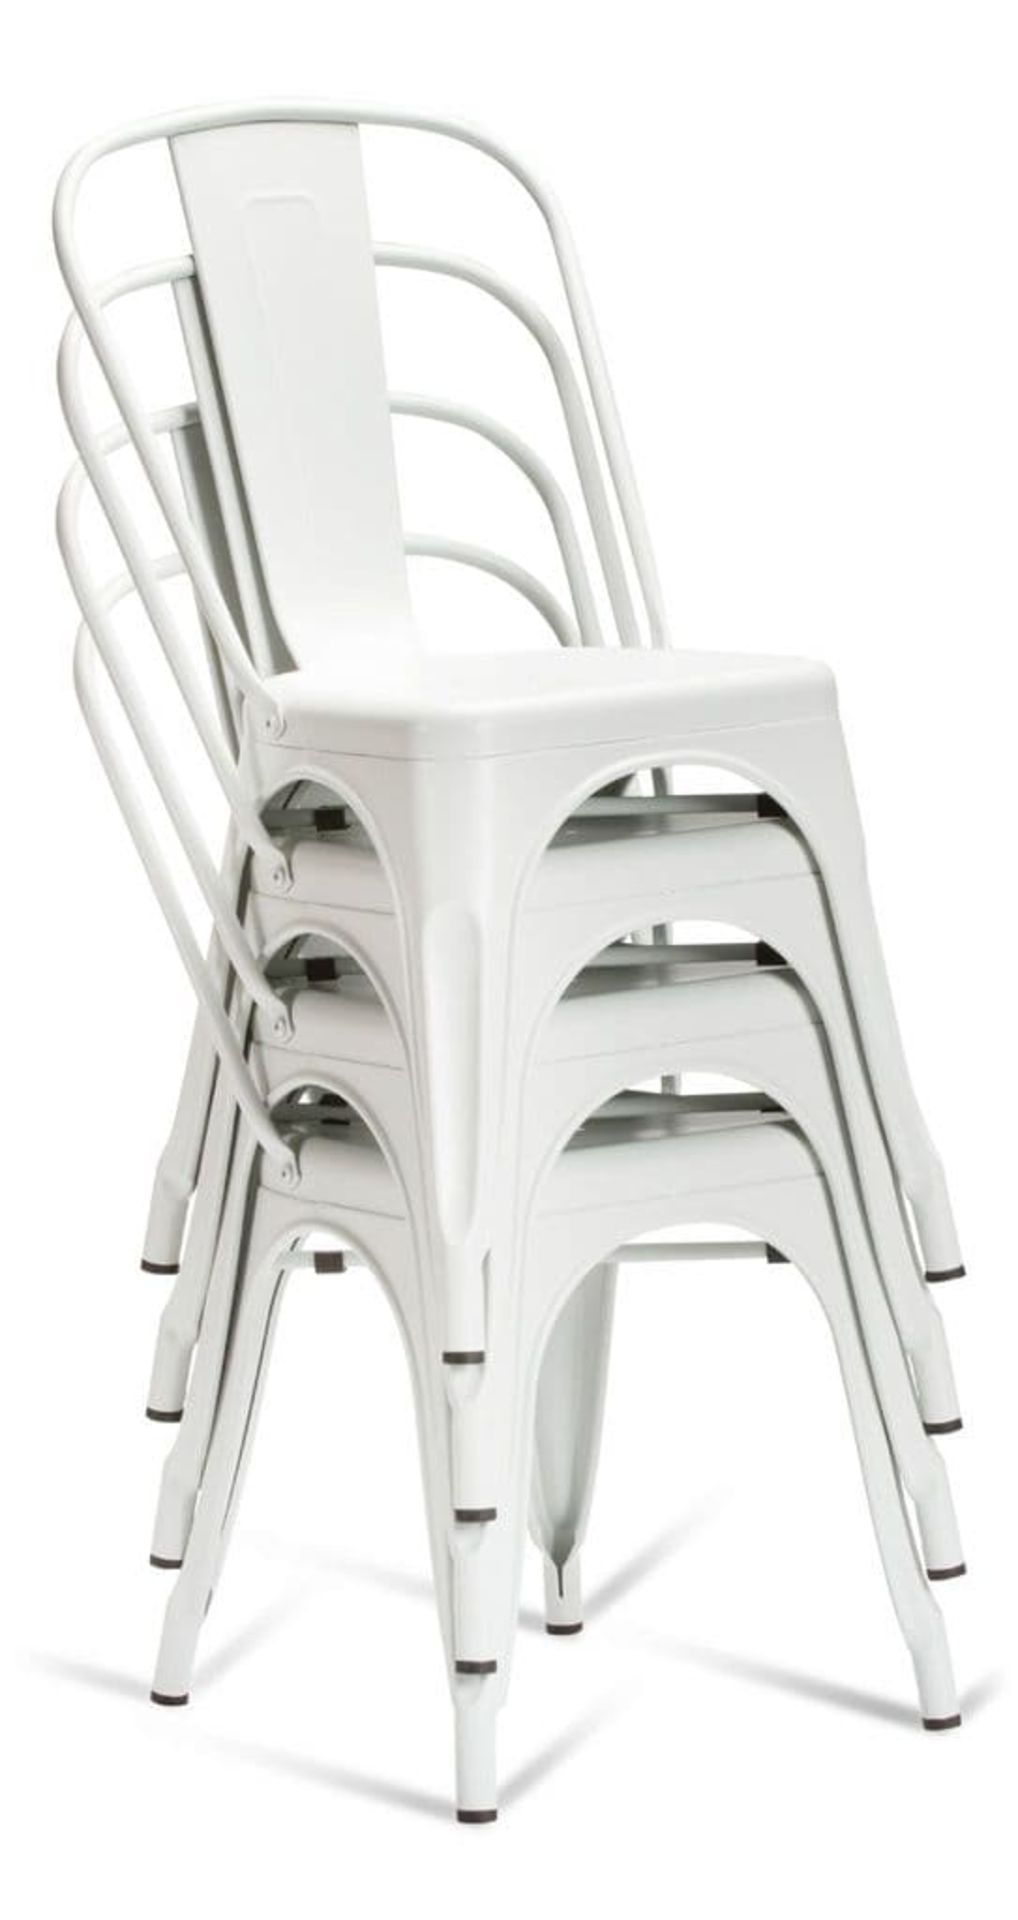 1 x Tolix Industrial Style Outdoor Bistro Table and Chair Set in White- Includes 1 x Table and 4 x - Image 8 of 12